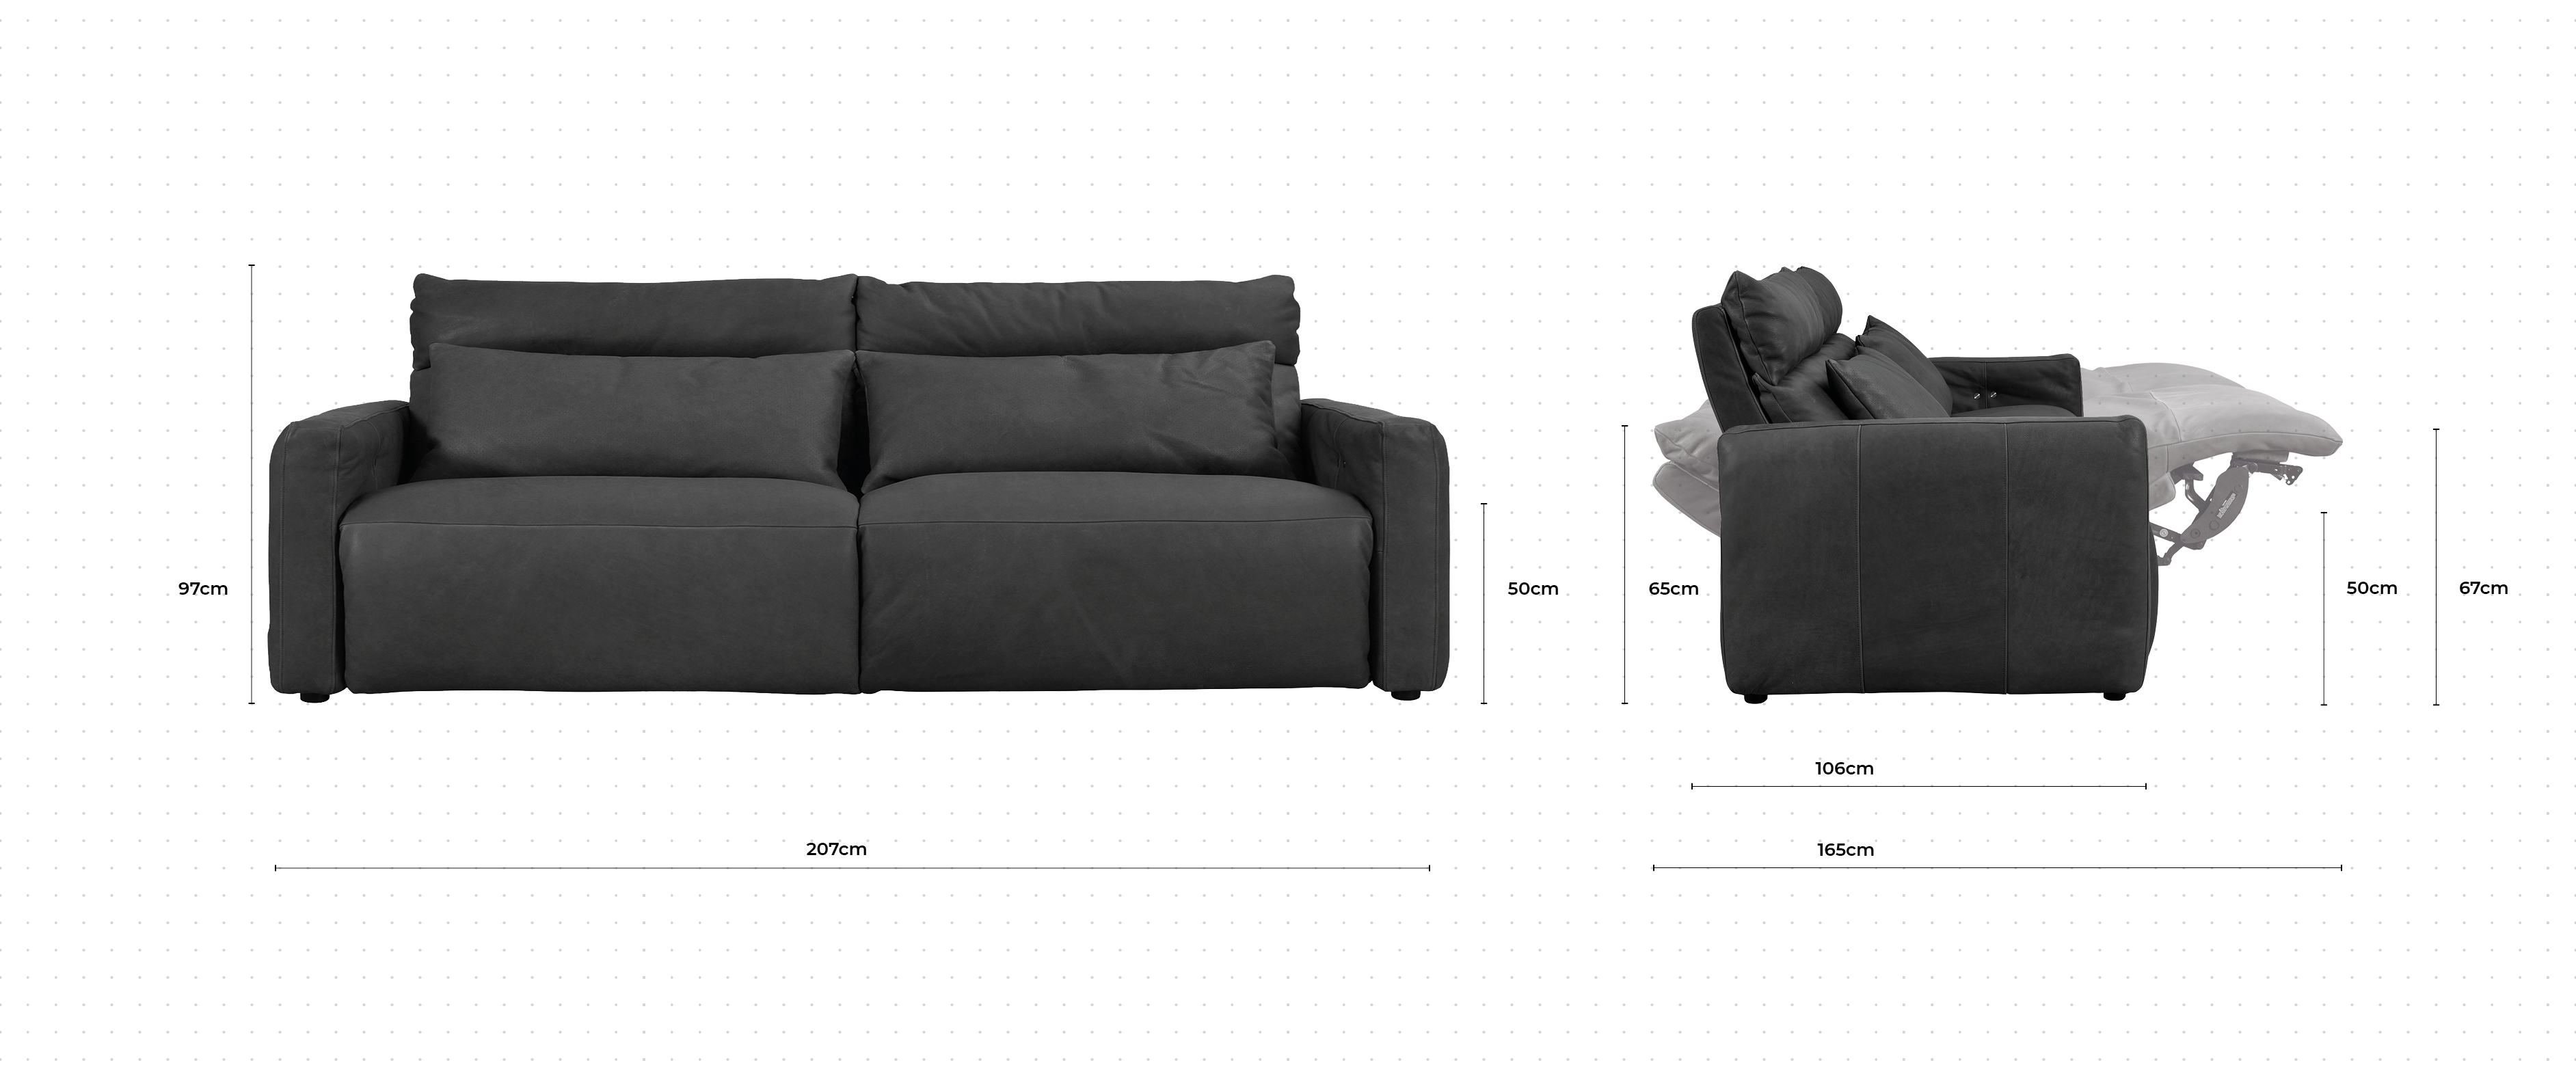 Ridley 3 Seater Sofa dimensions